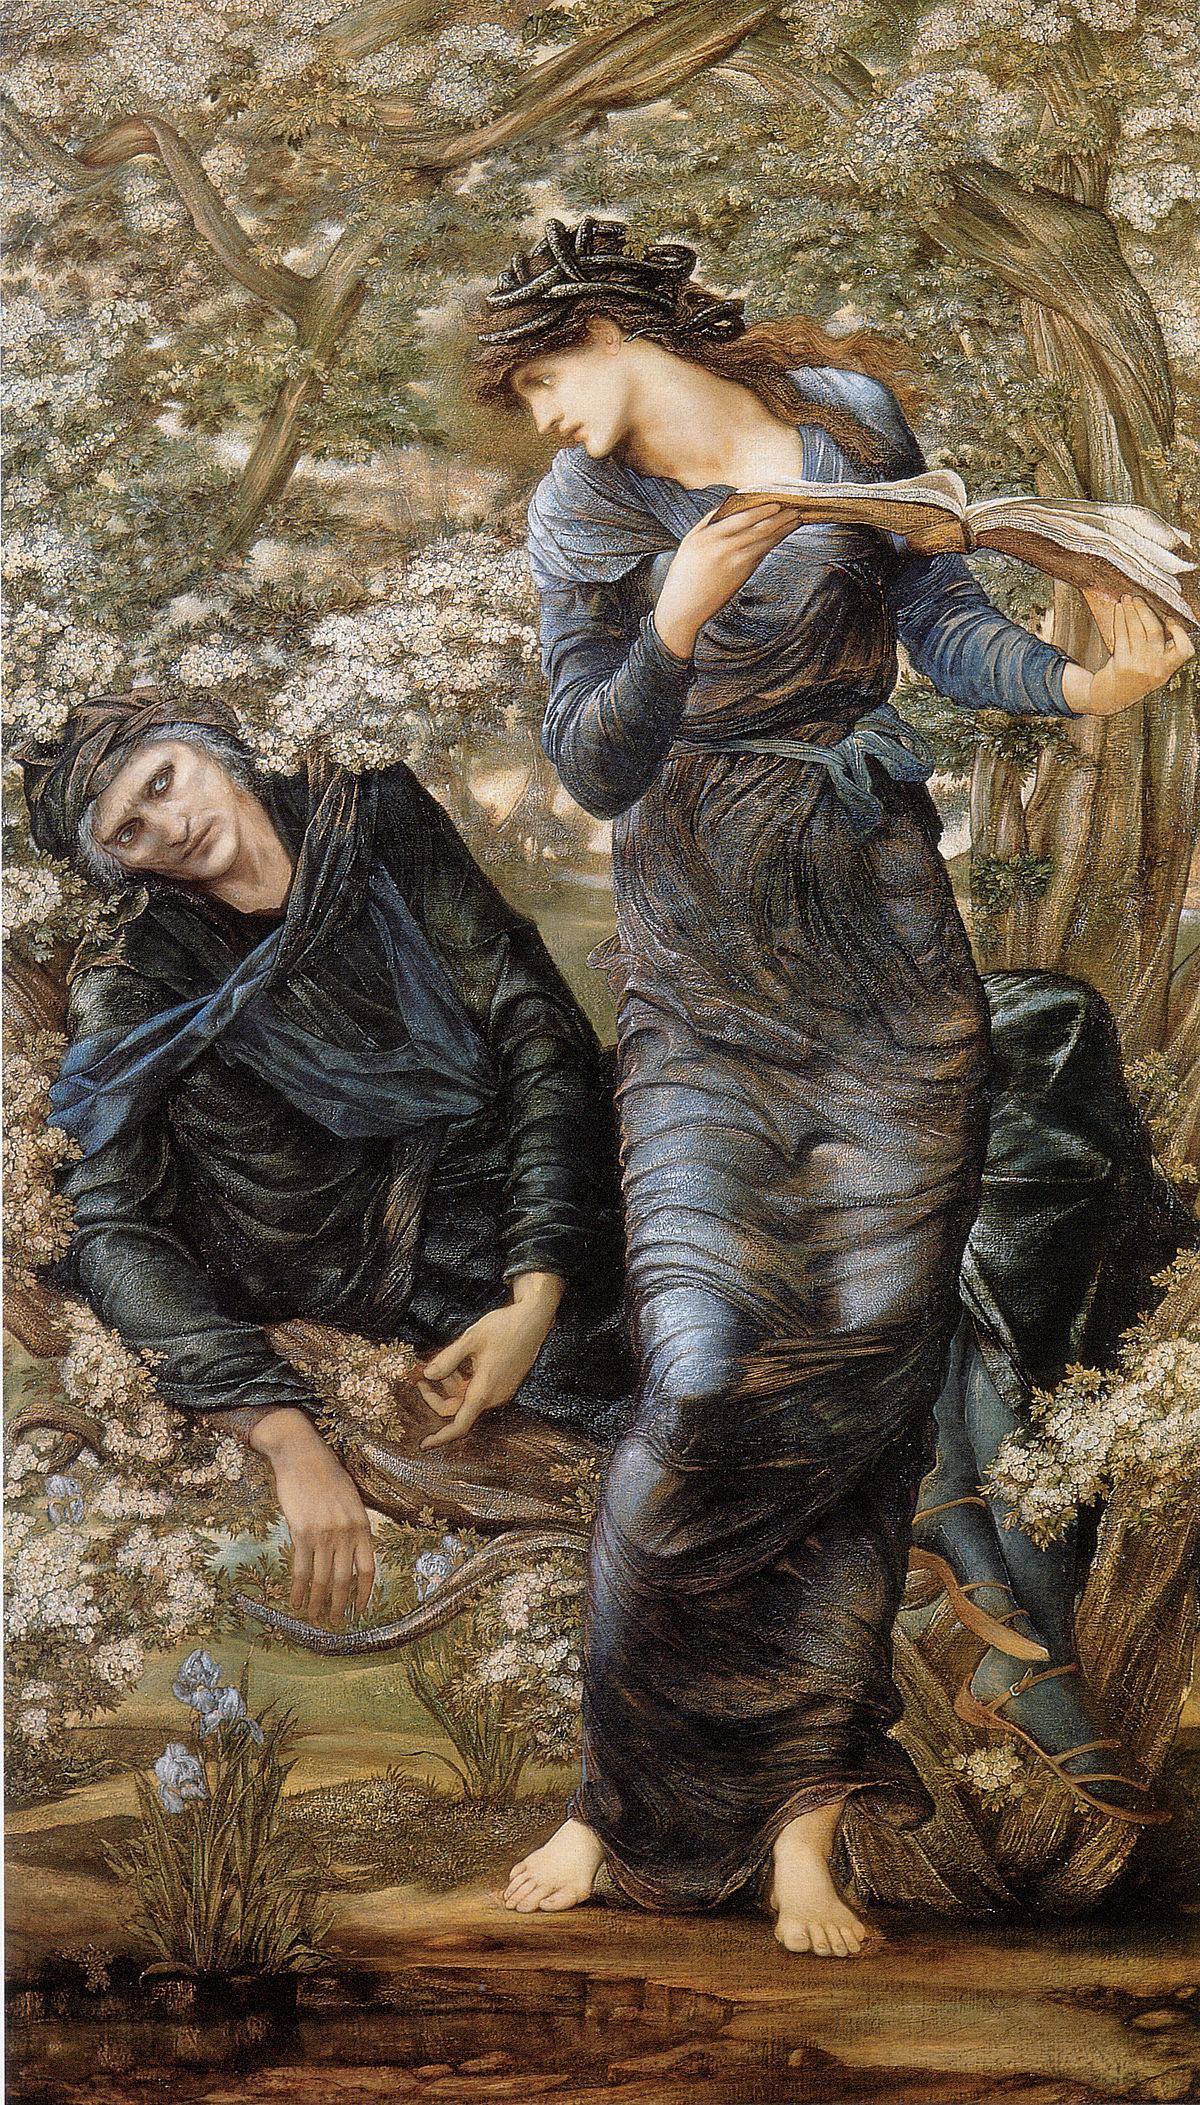 A sorceress surrounded by flowers in front of a male lying on the ground covered by tree branches. 